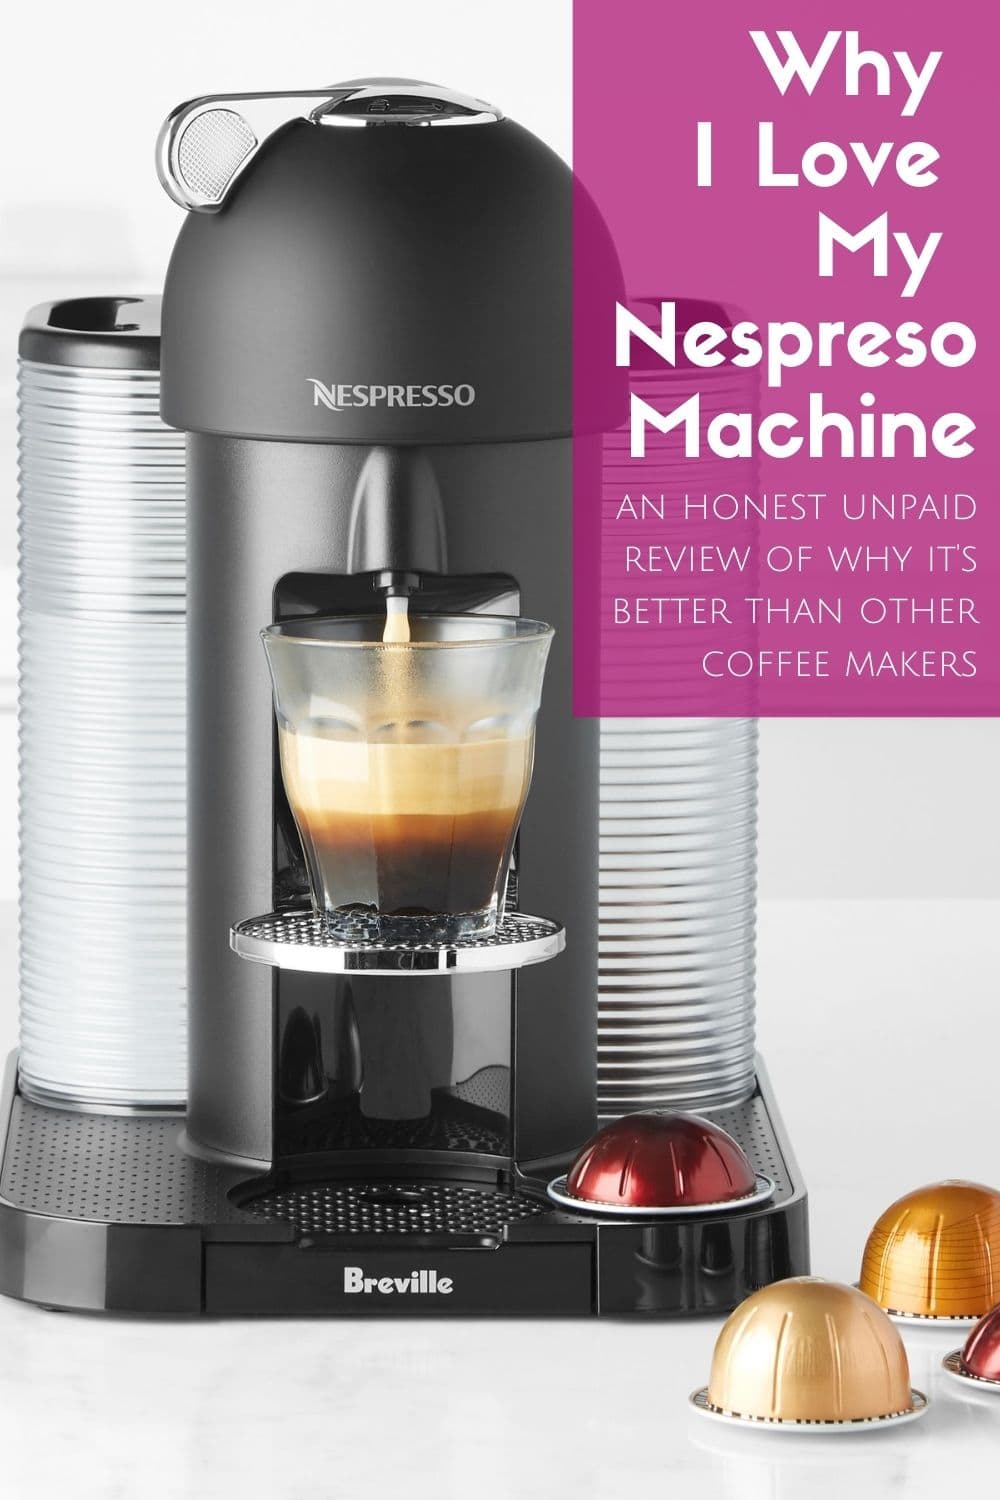 https://www.wardrobeoxygen.com/wp-content/uploads/2019/12/why-i-love-my-nespresso-machine-more-than-any-other-coffee-maker.jpg